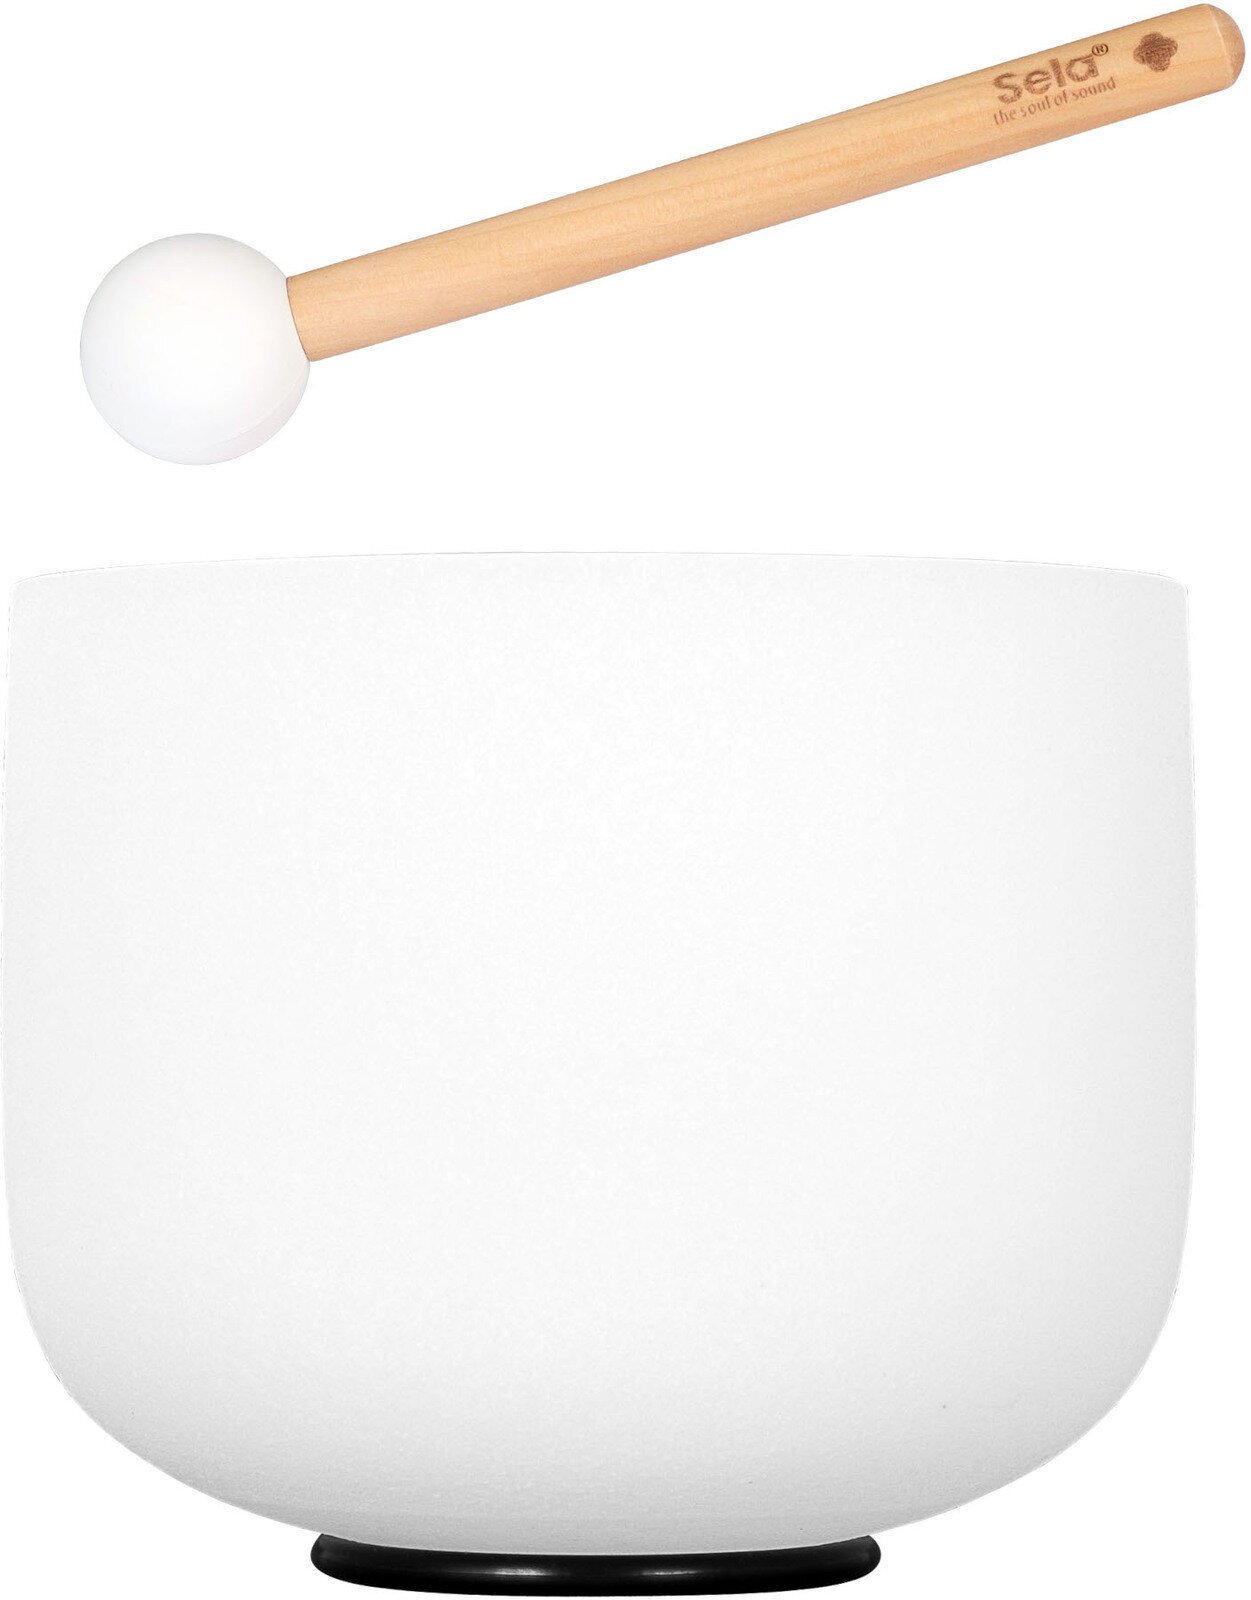 Percussions musicothérapeutiques Sela 10" Crystal Singing Bowl Frosted 432 Hz E incl. 1 Wood Mallet